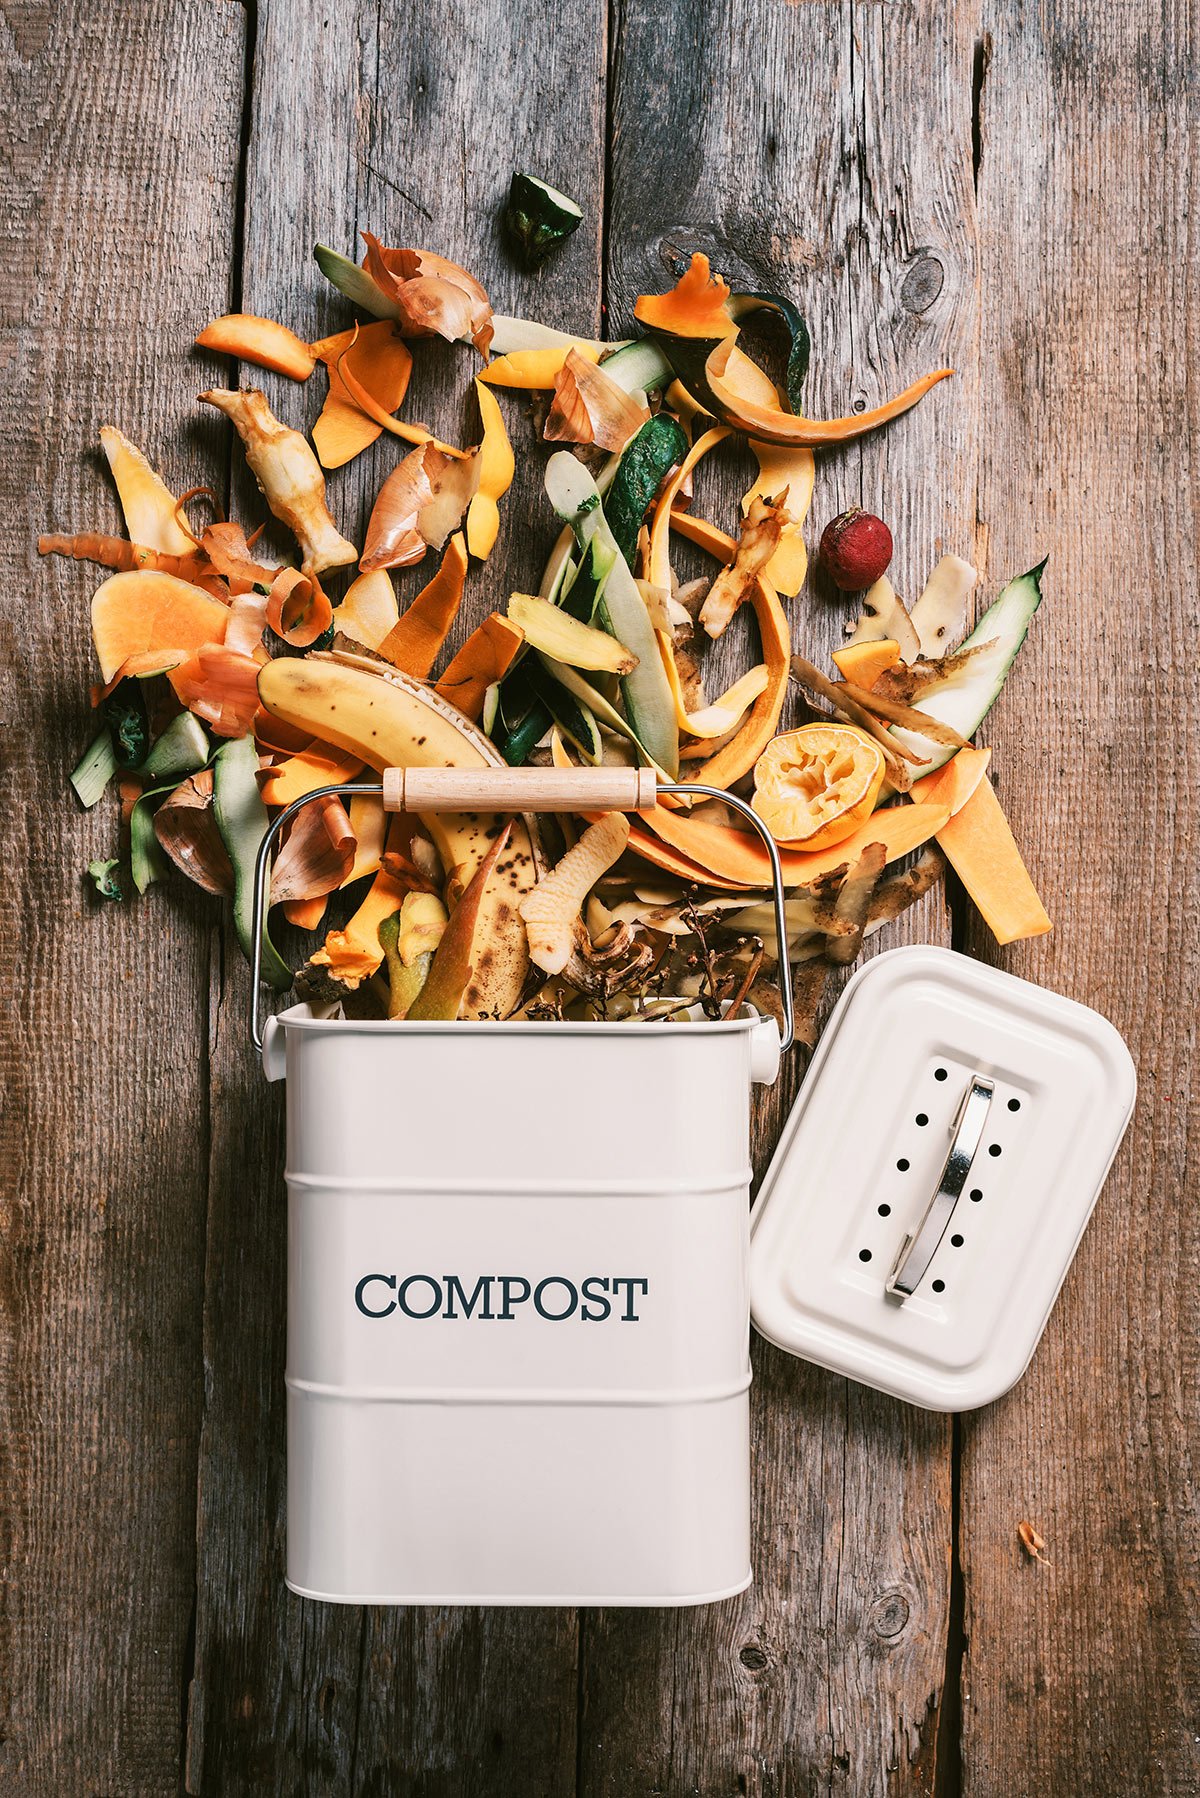 11 Ways to Upcycle Food Scraps In Your Own Kitchen